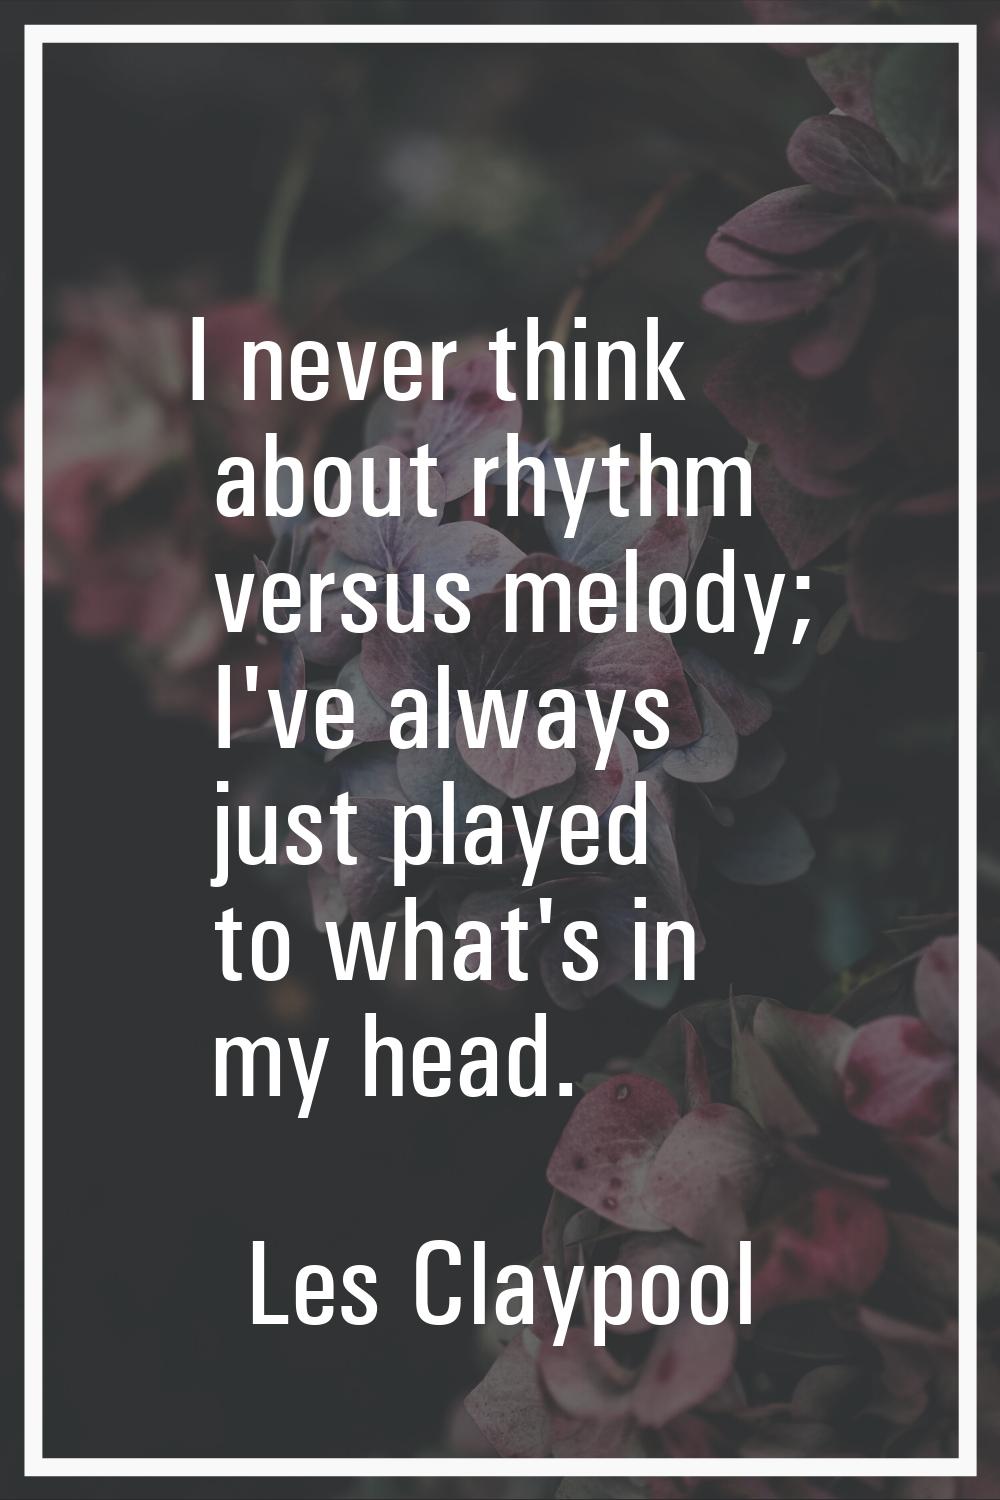 I never think about rhythm versus melody; I've always just played to what's in my head.